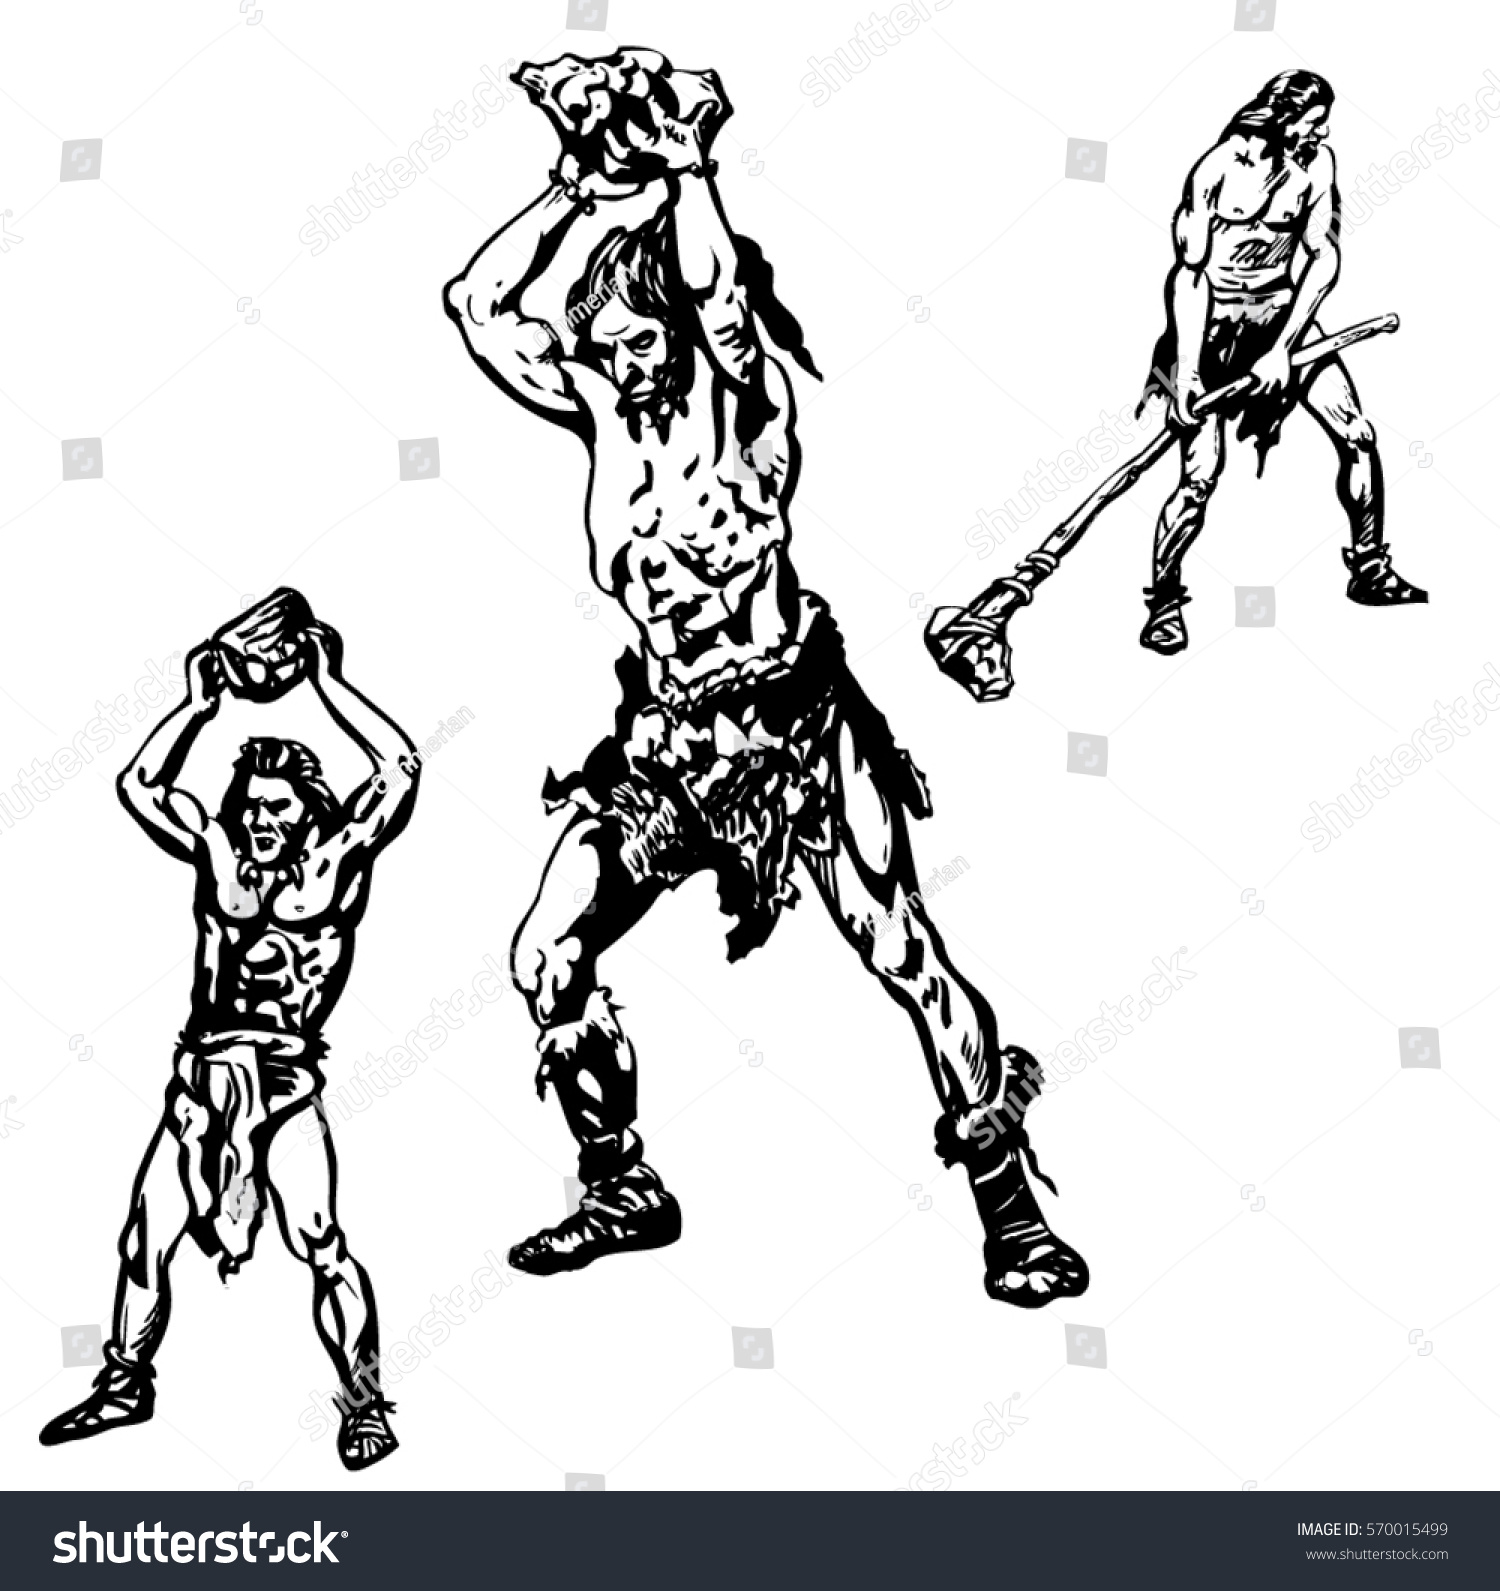 SVG of Cro-Magnons soldiers, the old man (Homo sapiens). Ancient people. Hand drawn illustration. svg